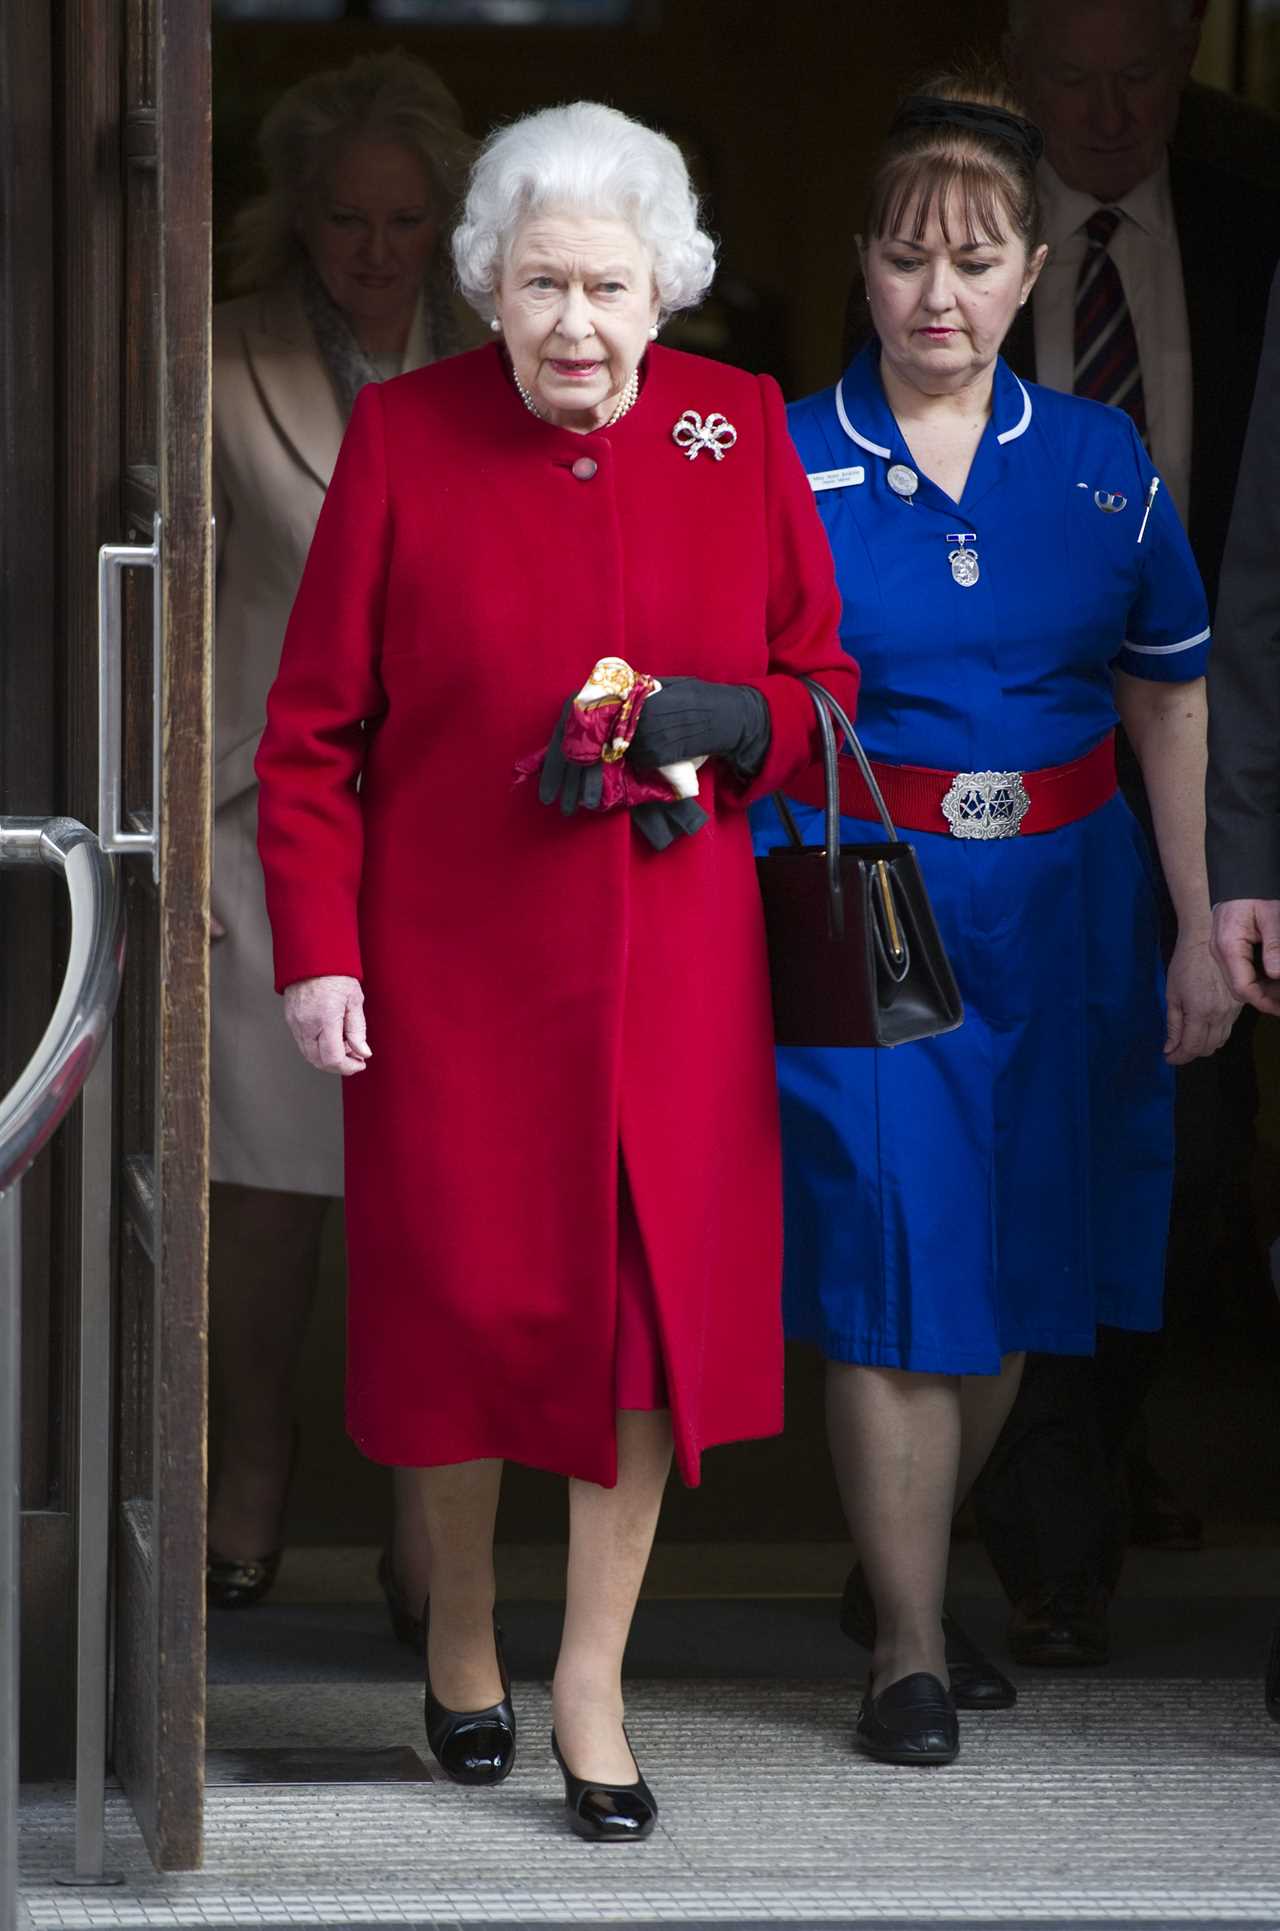 The Queen, 95, cancelled official duties as she was seen by specialists on Wednesday afternoon, pictured here at her last over-night stay in 2013